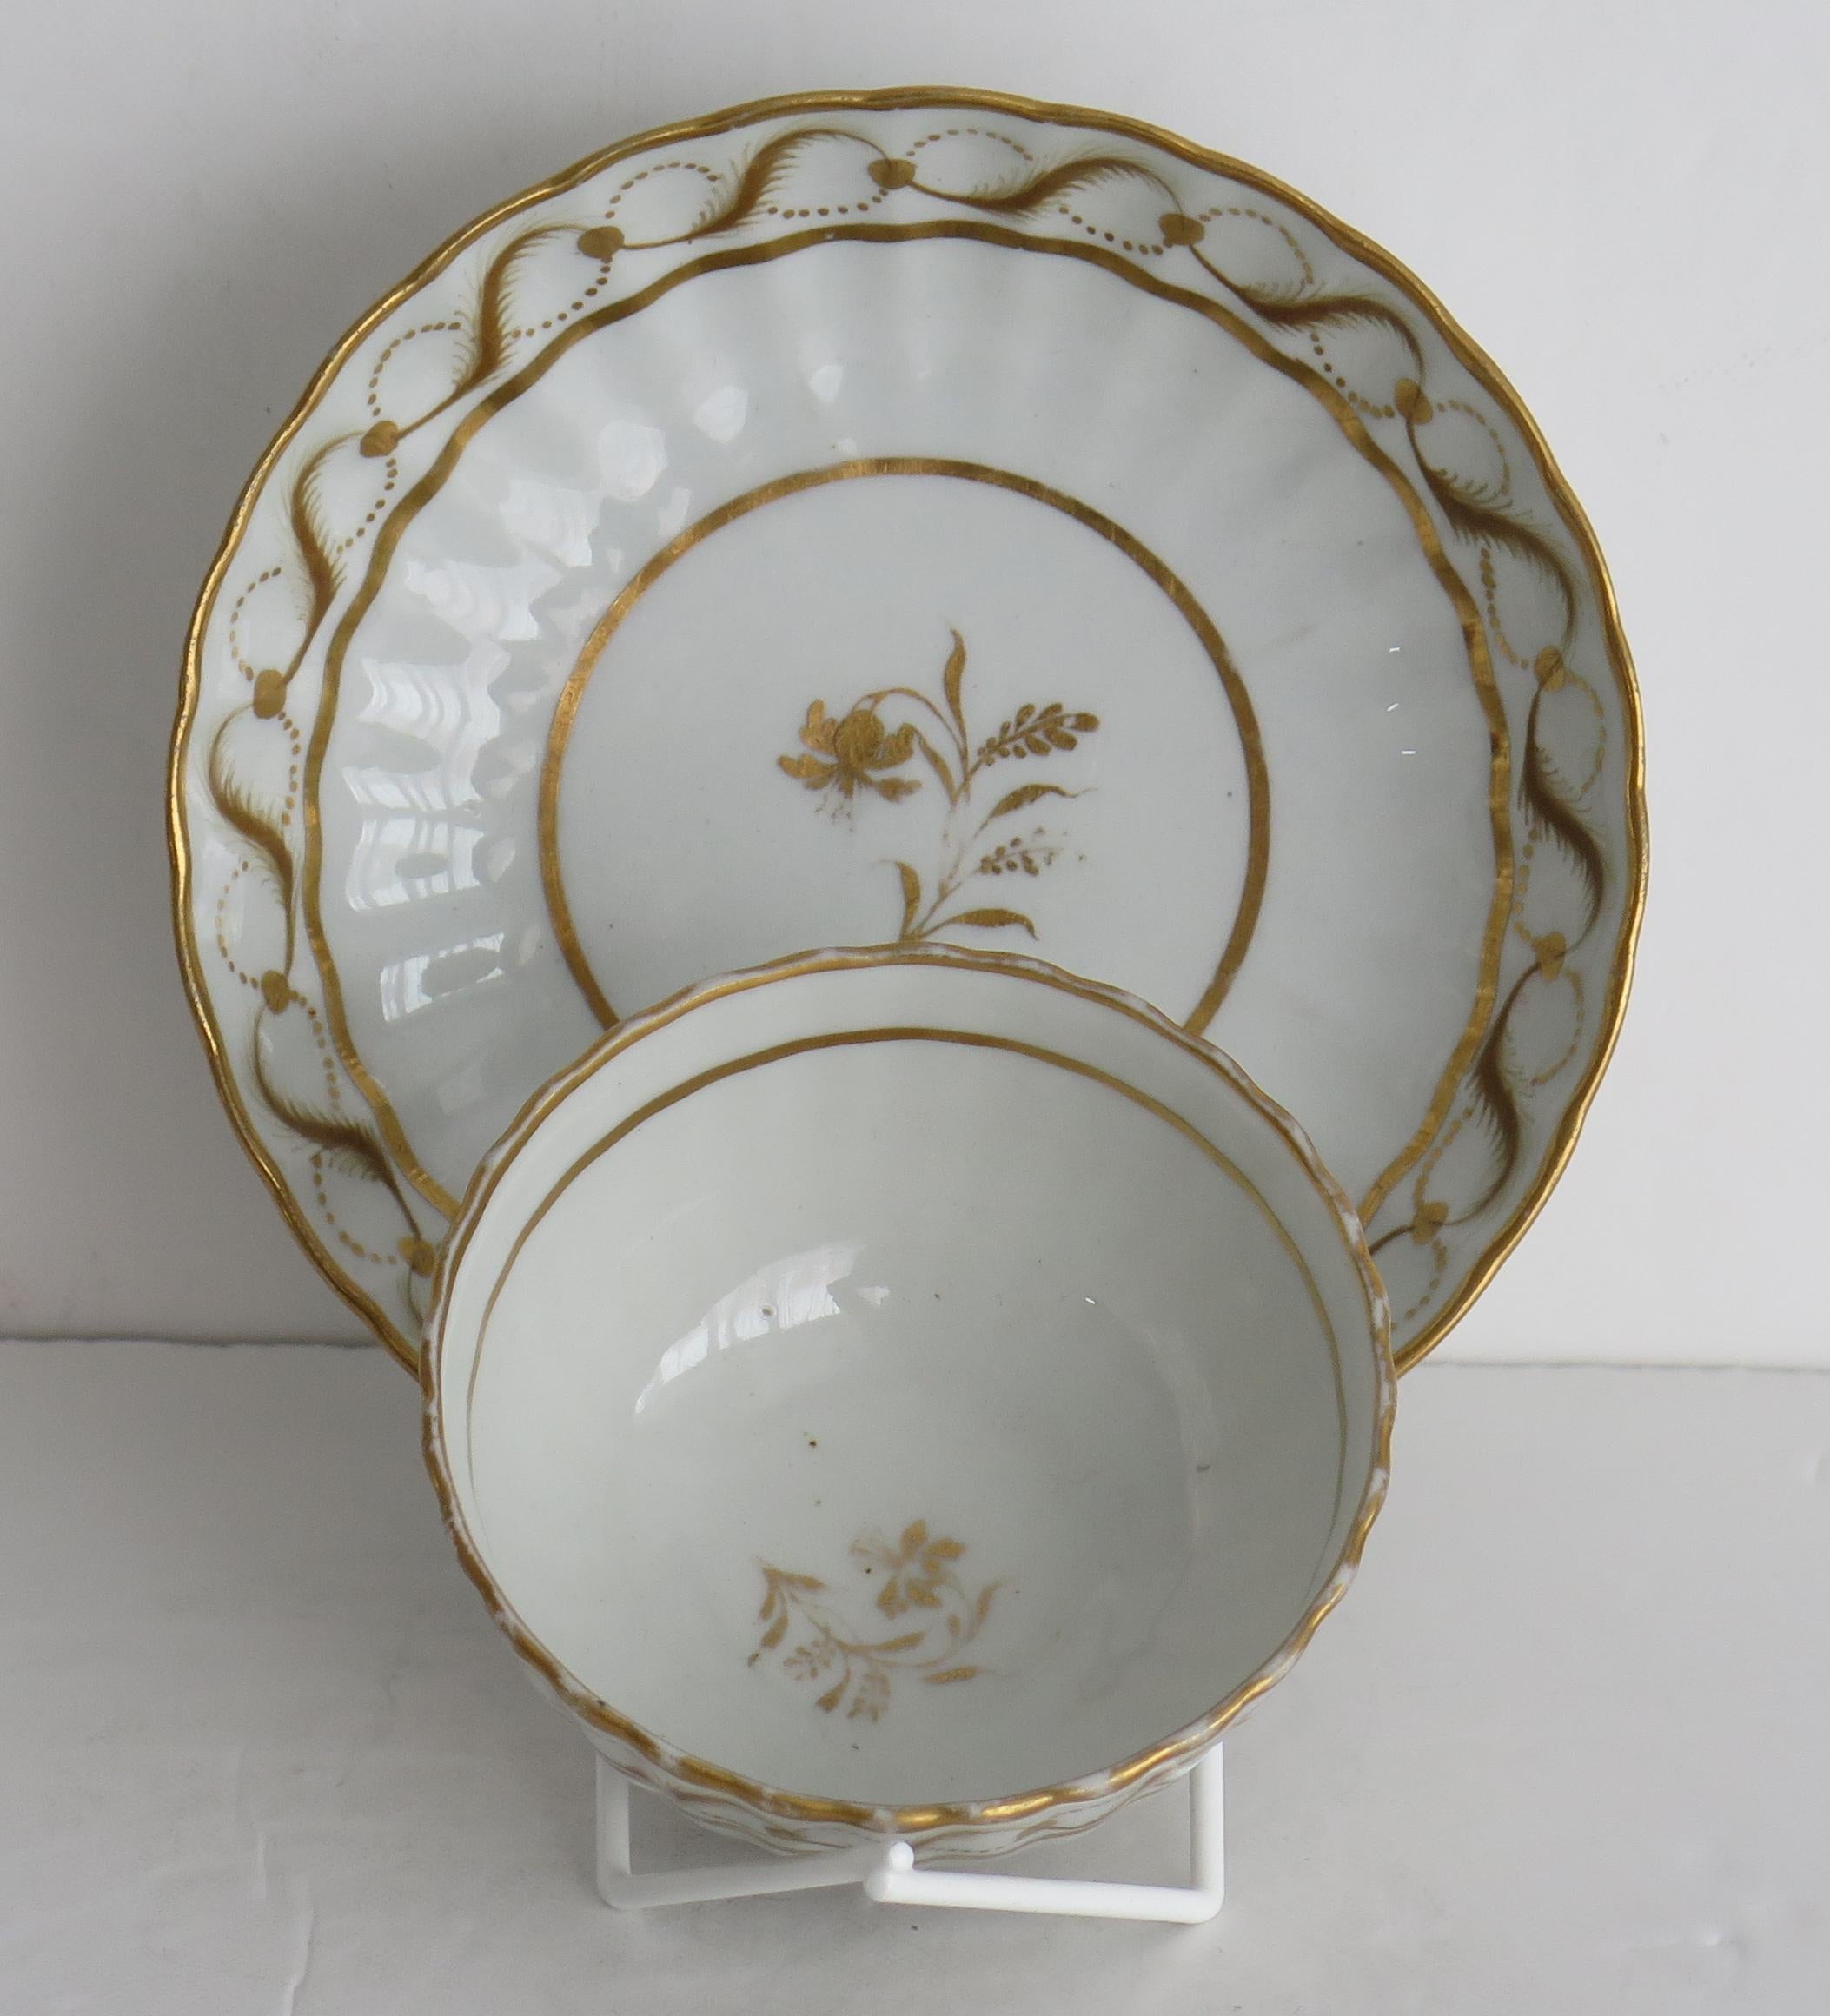 This is a very fine hard paste porcelain Tea Bowl and Saucer by New Hall, dating to the 18th century, George 111rd period, circa 1785.

Both pieces have 24 vertical flutes.

Both pieces are decorated over-glaze with a hand gilded gold painted